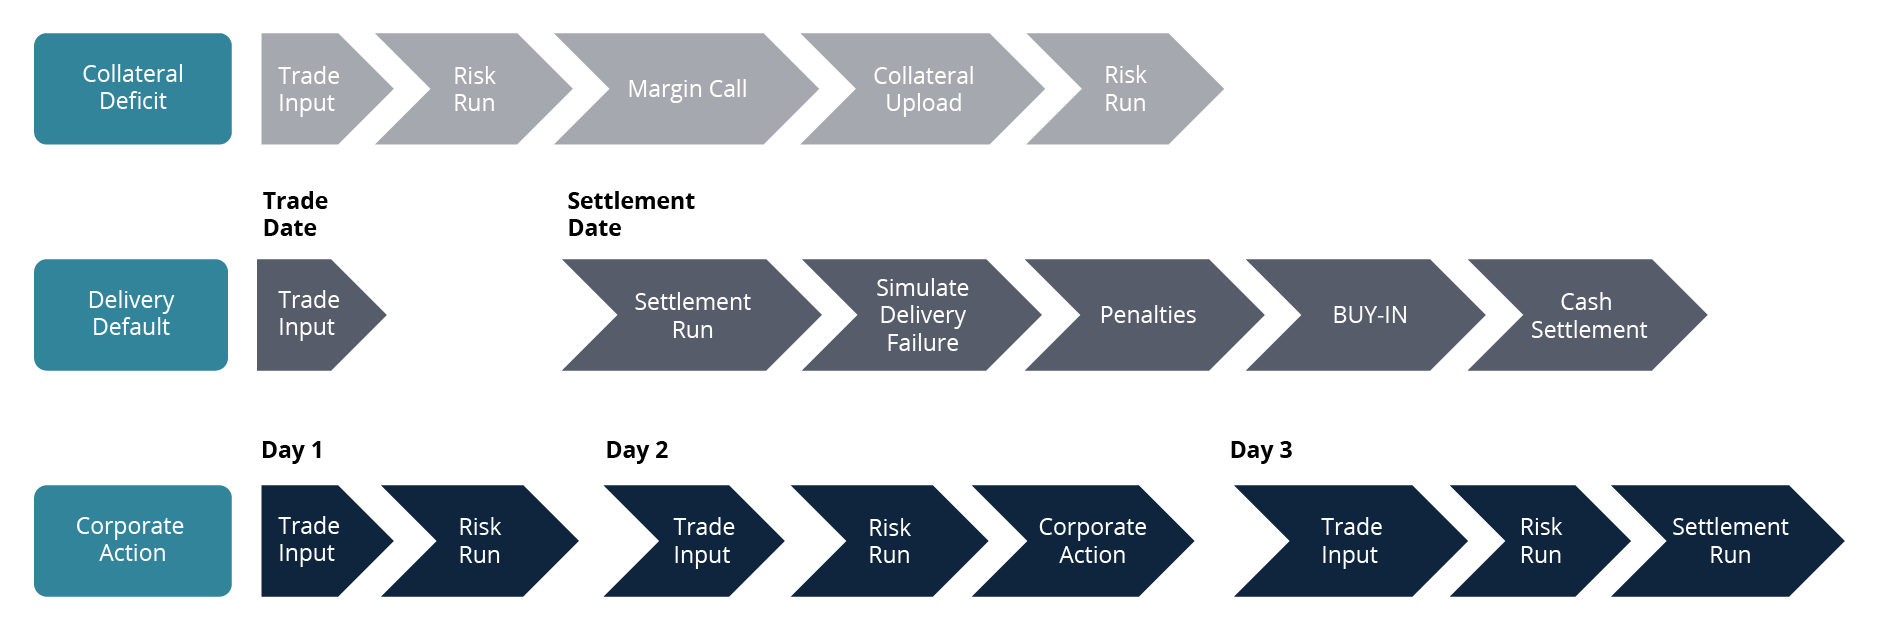 Collateral Deficit, Delivery Default, Corporate Action Testing Scenarios